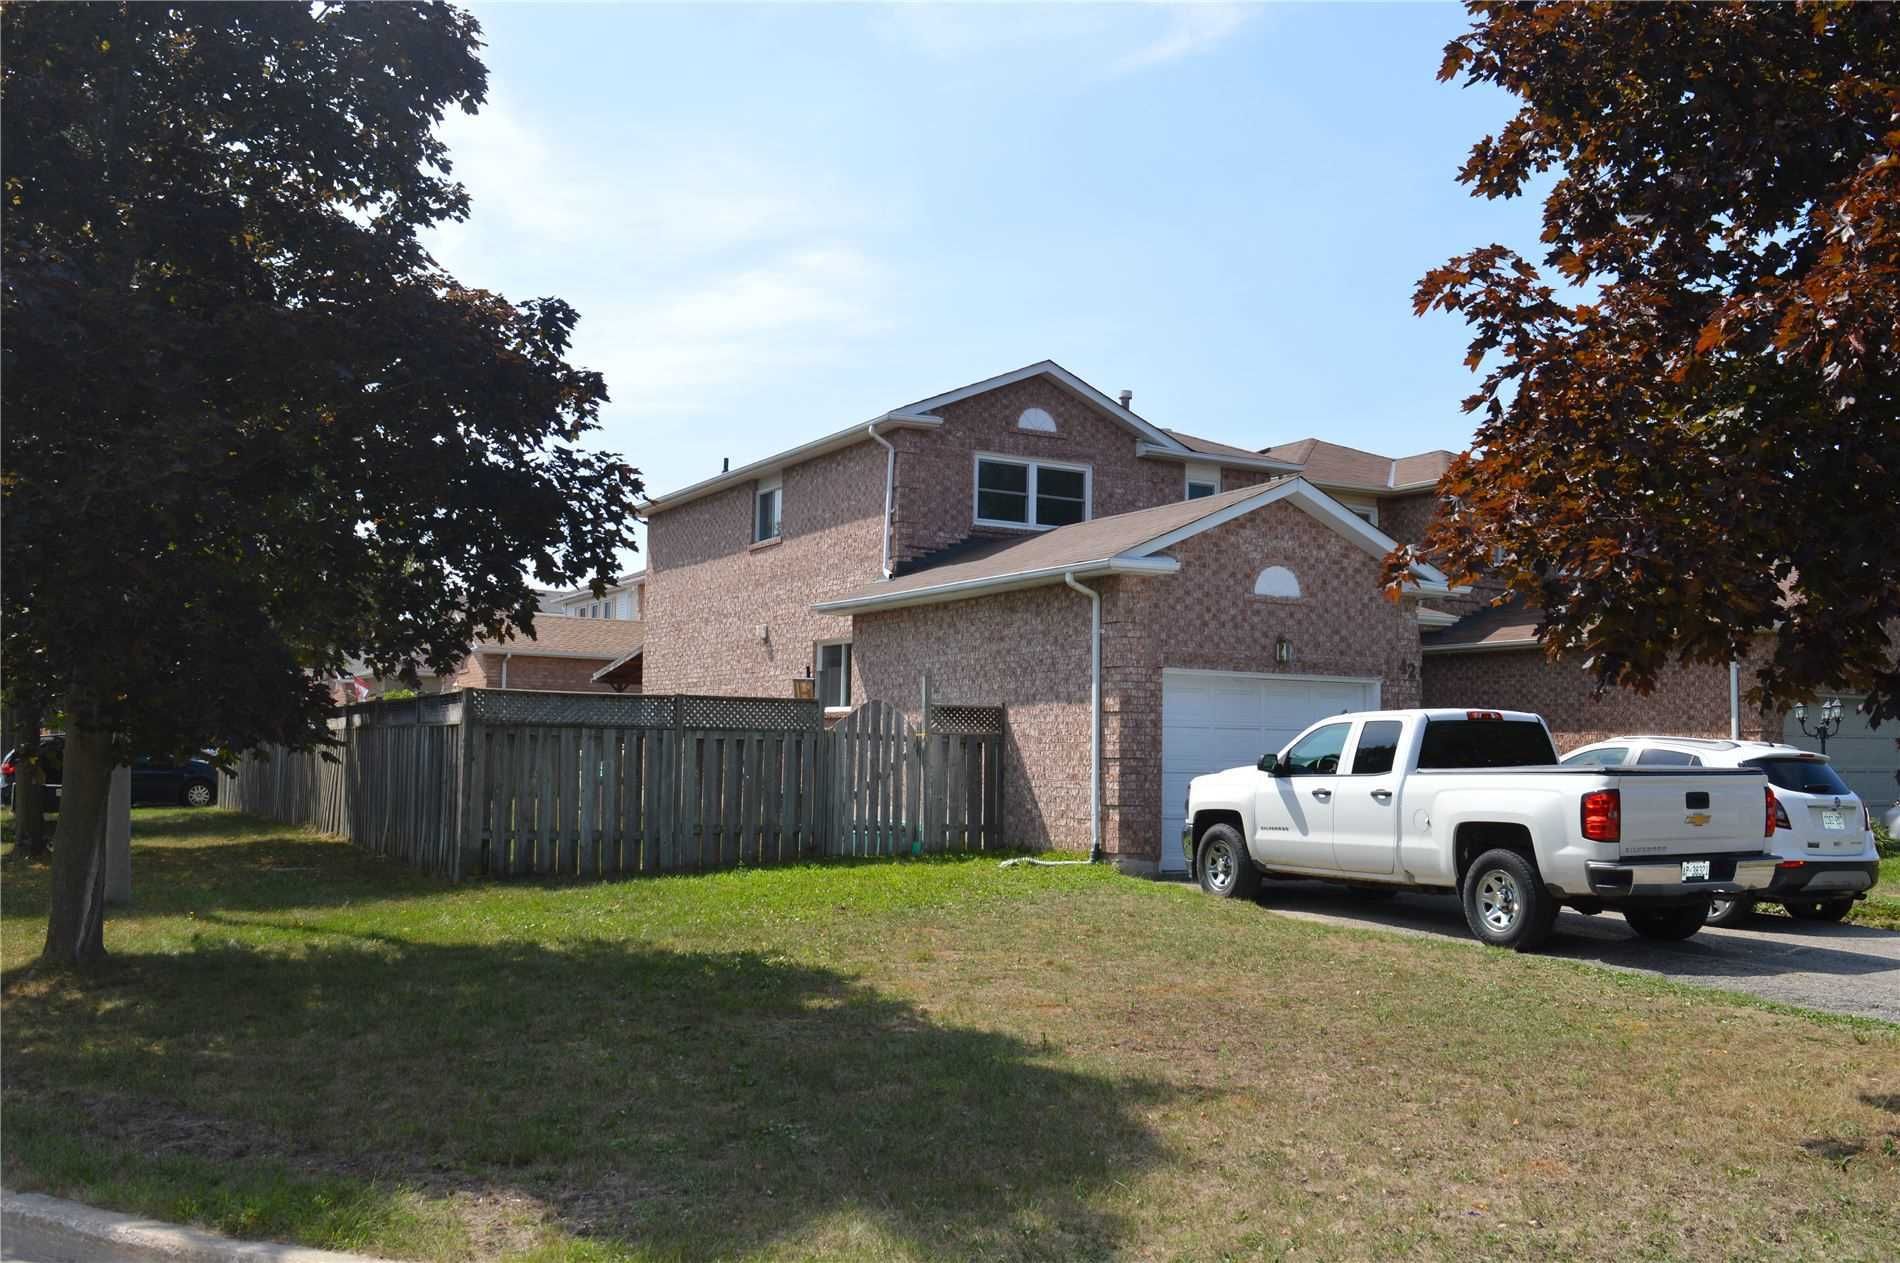 Main Photo: 42 Poolton Crescent in Clarington: Courtice House (2-Storey) for sale : MLS®# E4869220